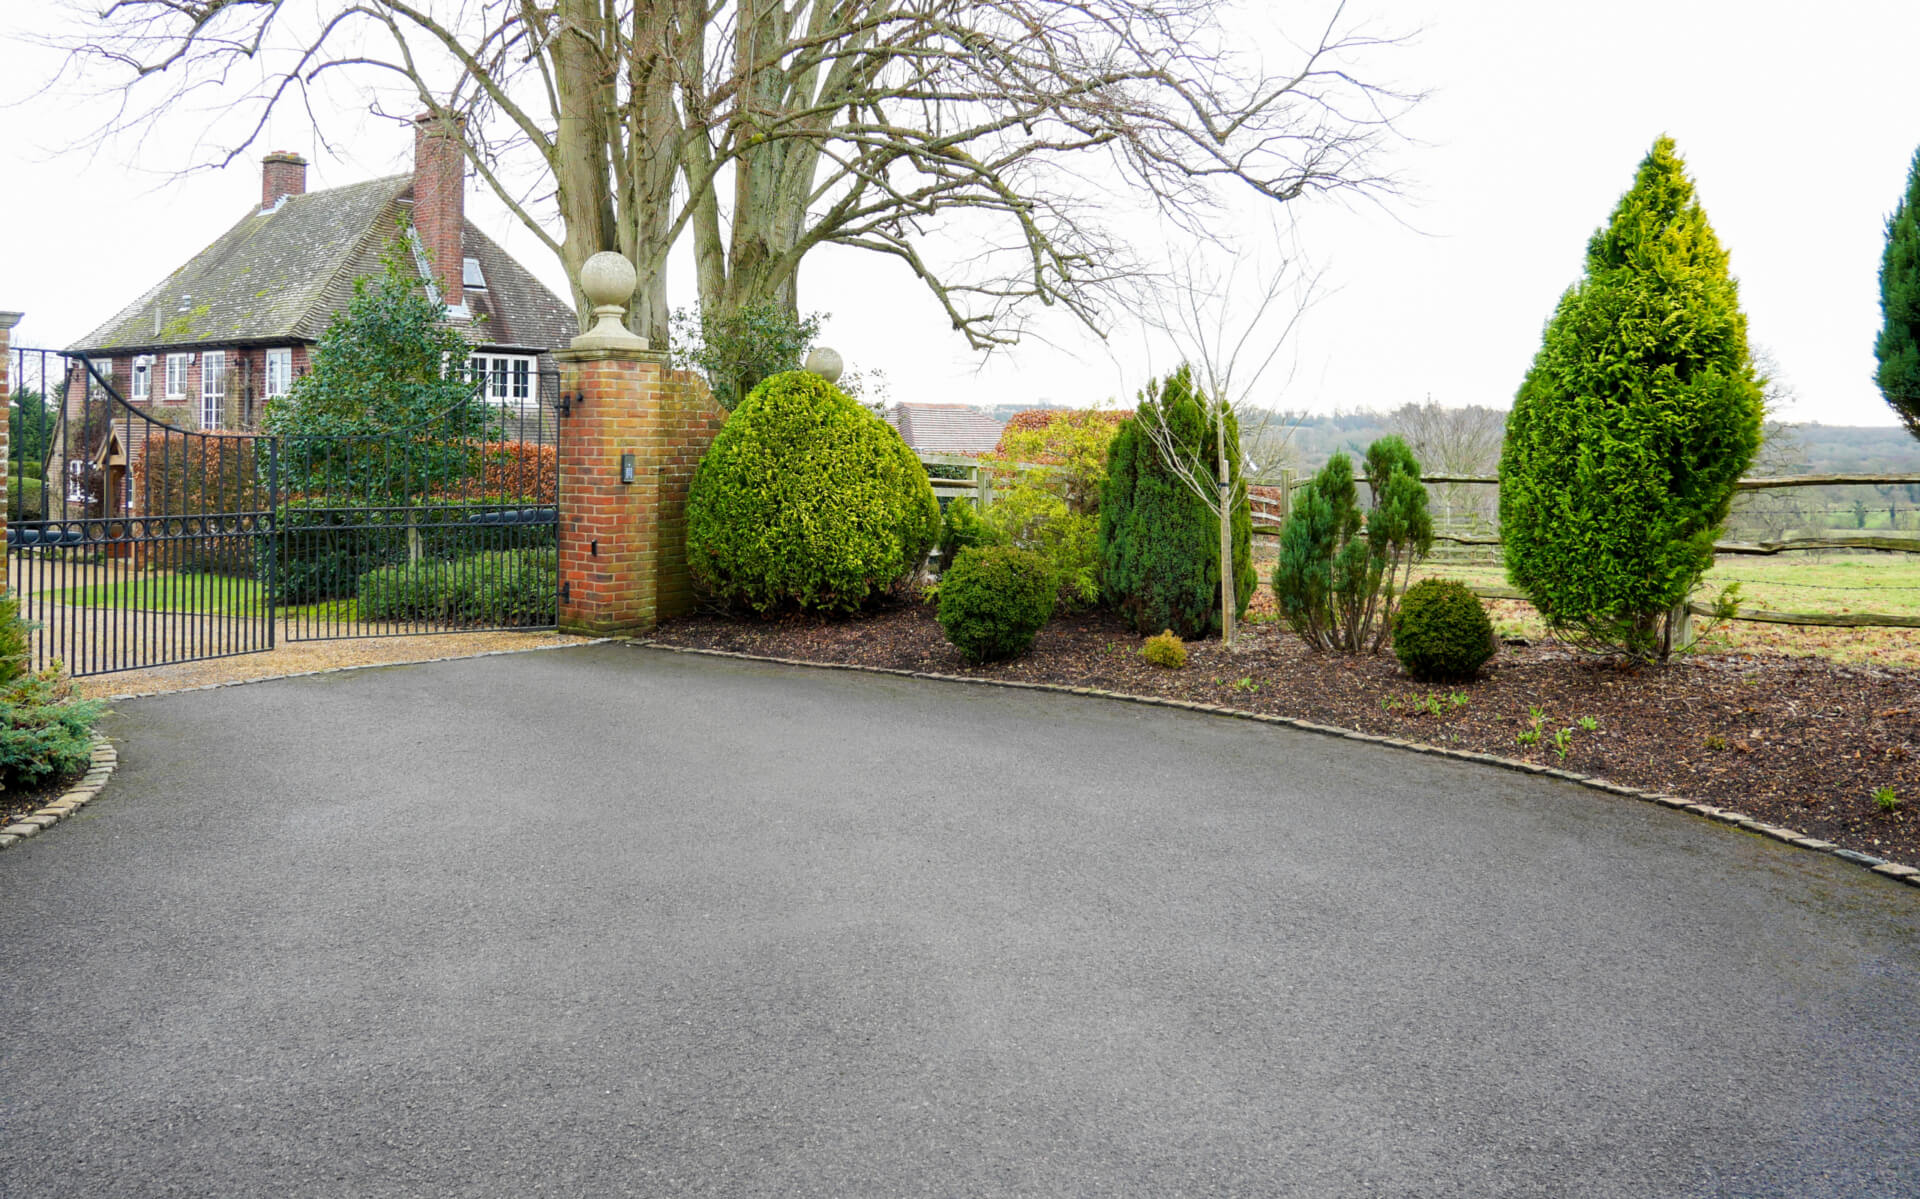 Private Driveway in England